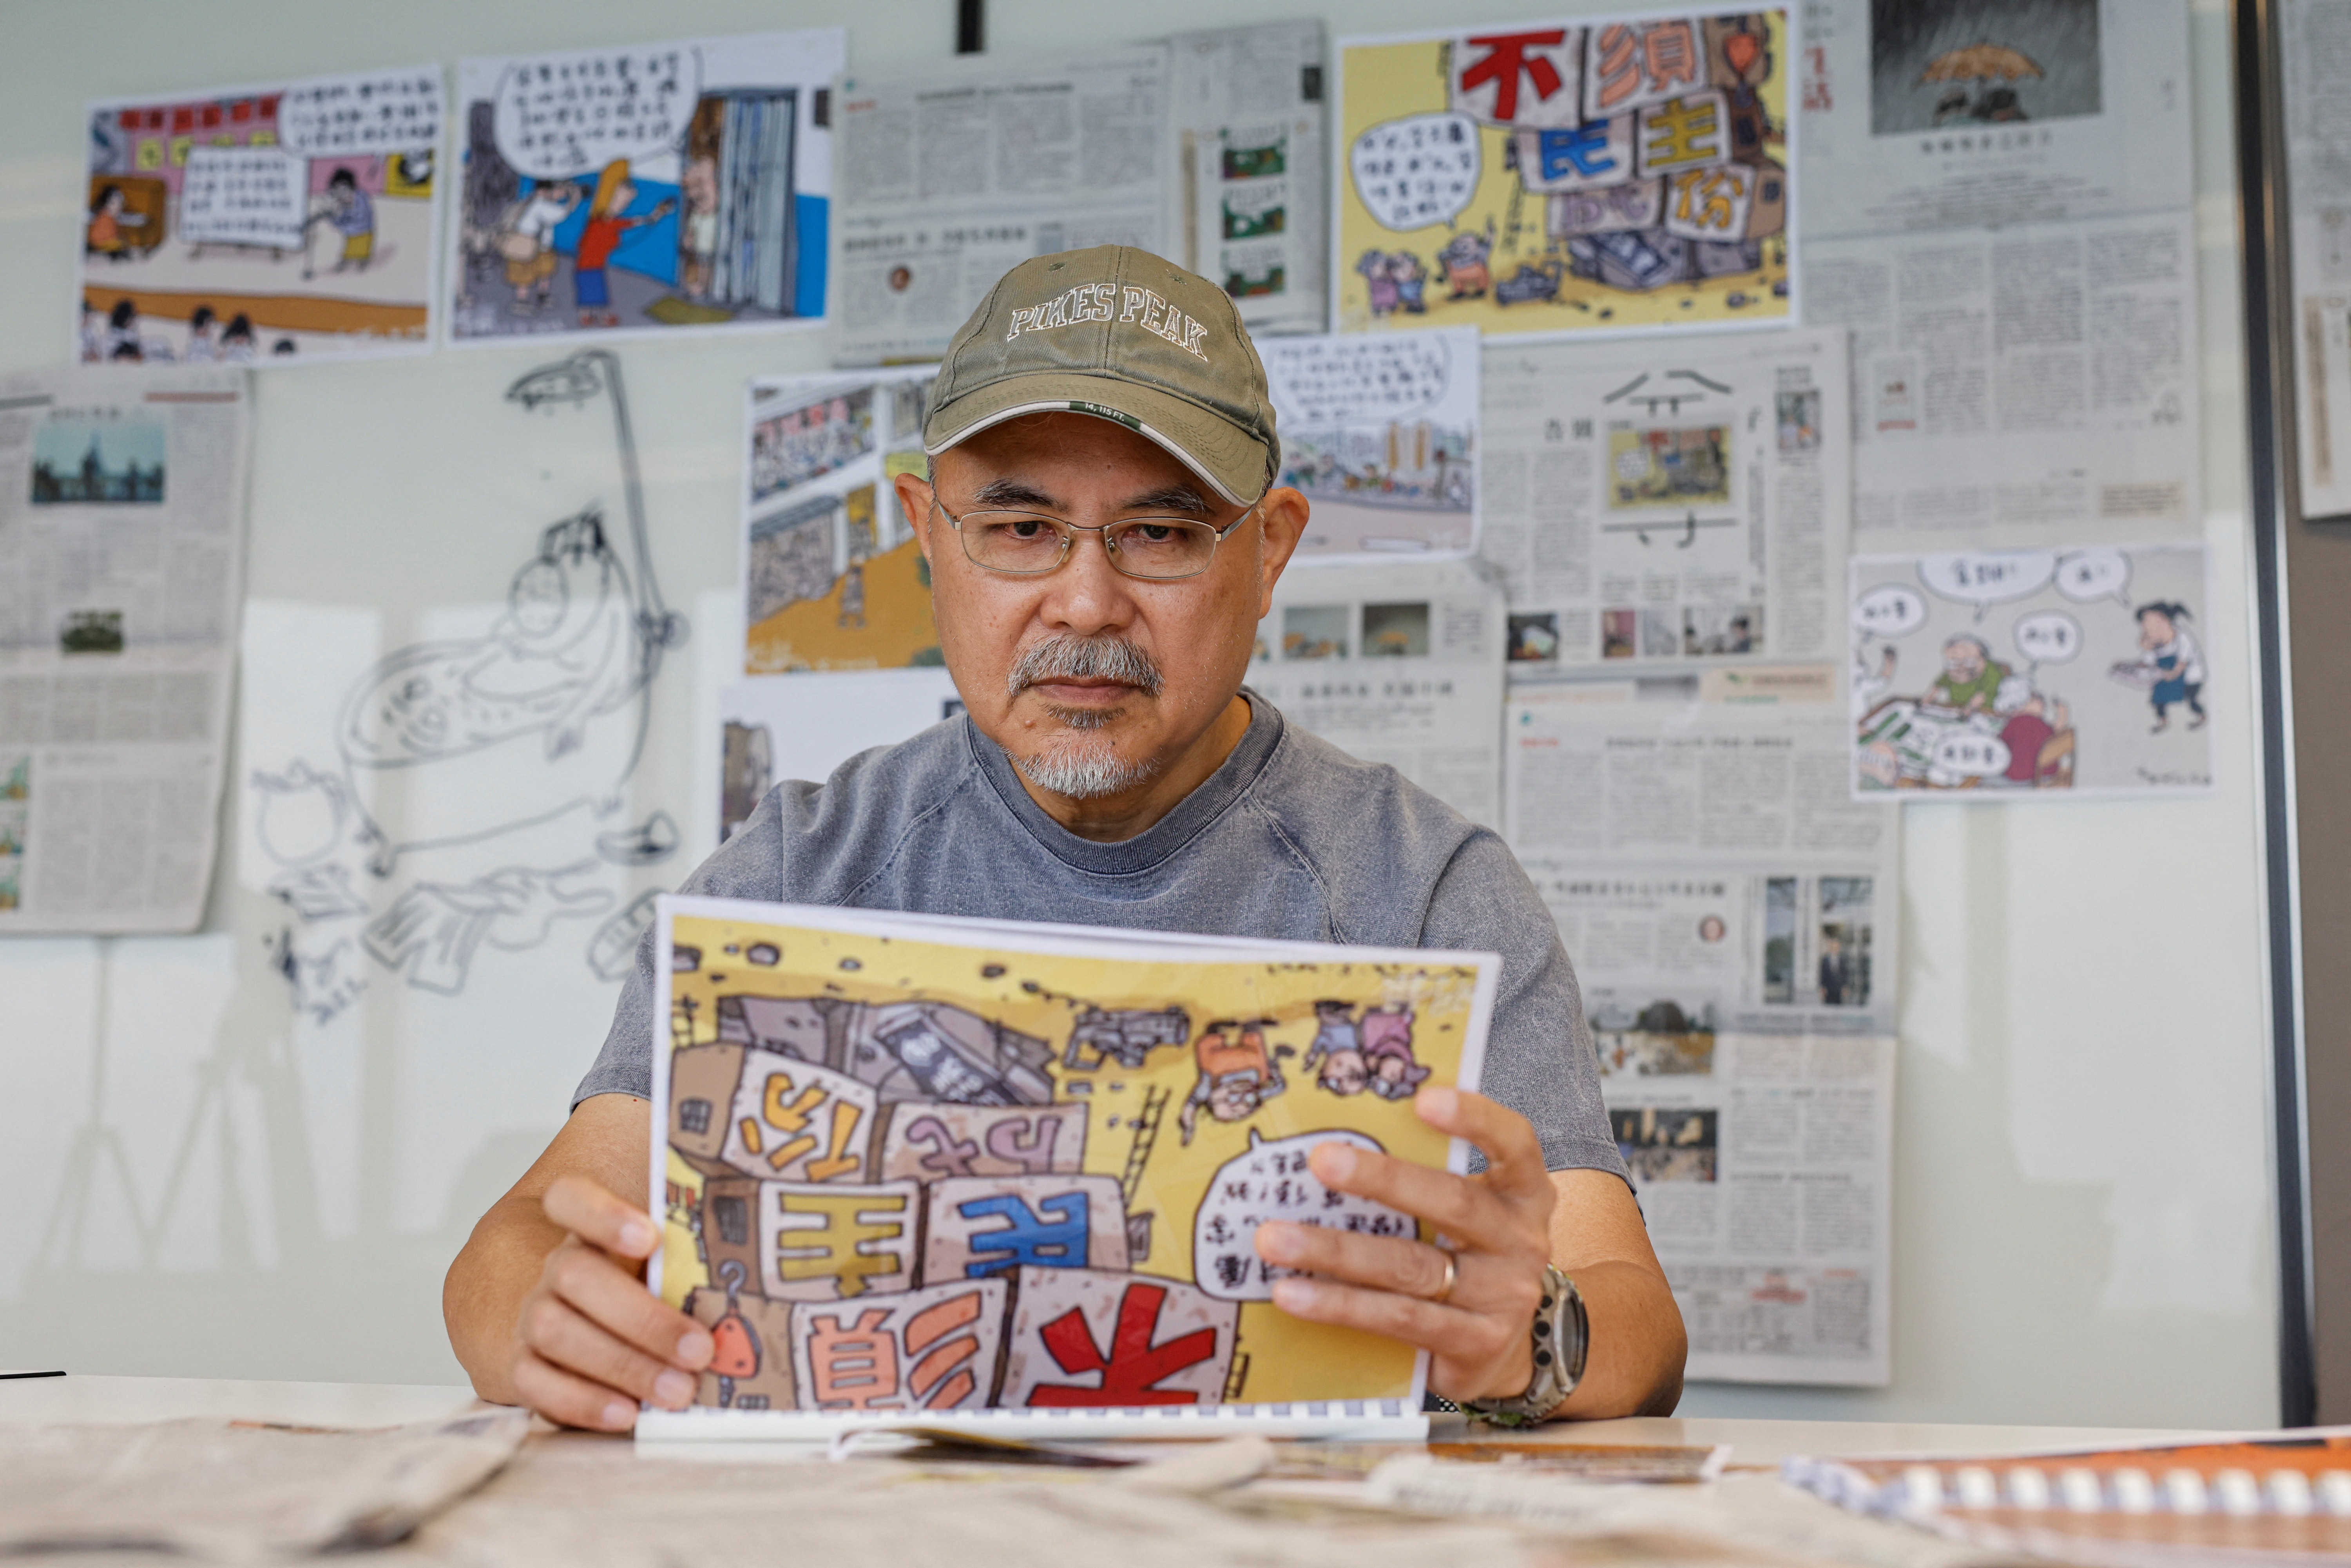 Cartoonist Wong Kei-kwan, who uses the pen name Zunzi, poses for photos after his comic strip has been scrapped from the local newspaper Ming Pao in Hong Kong